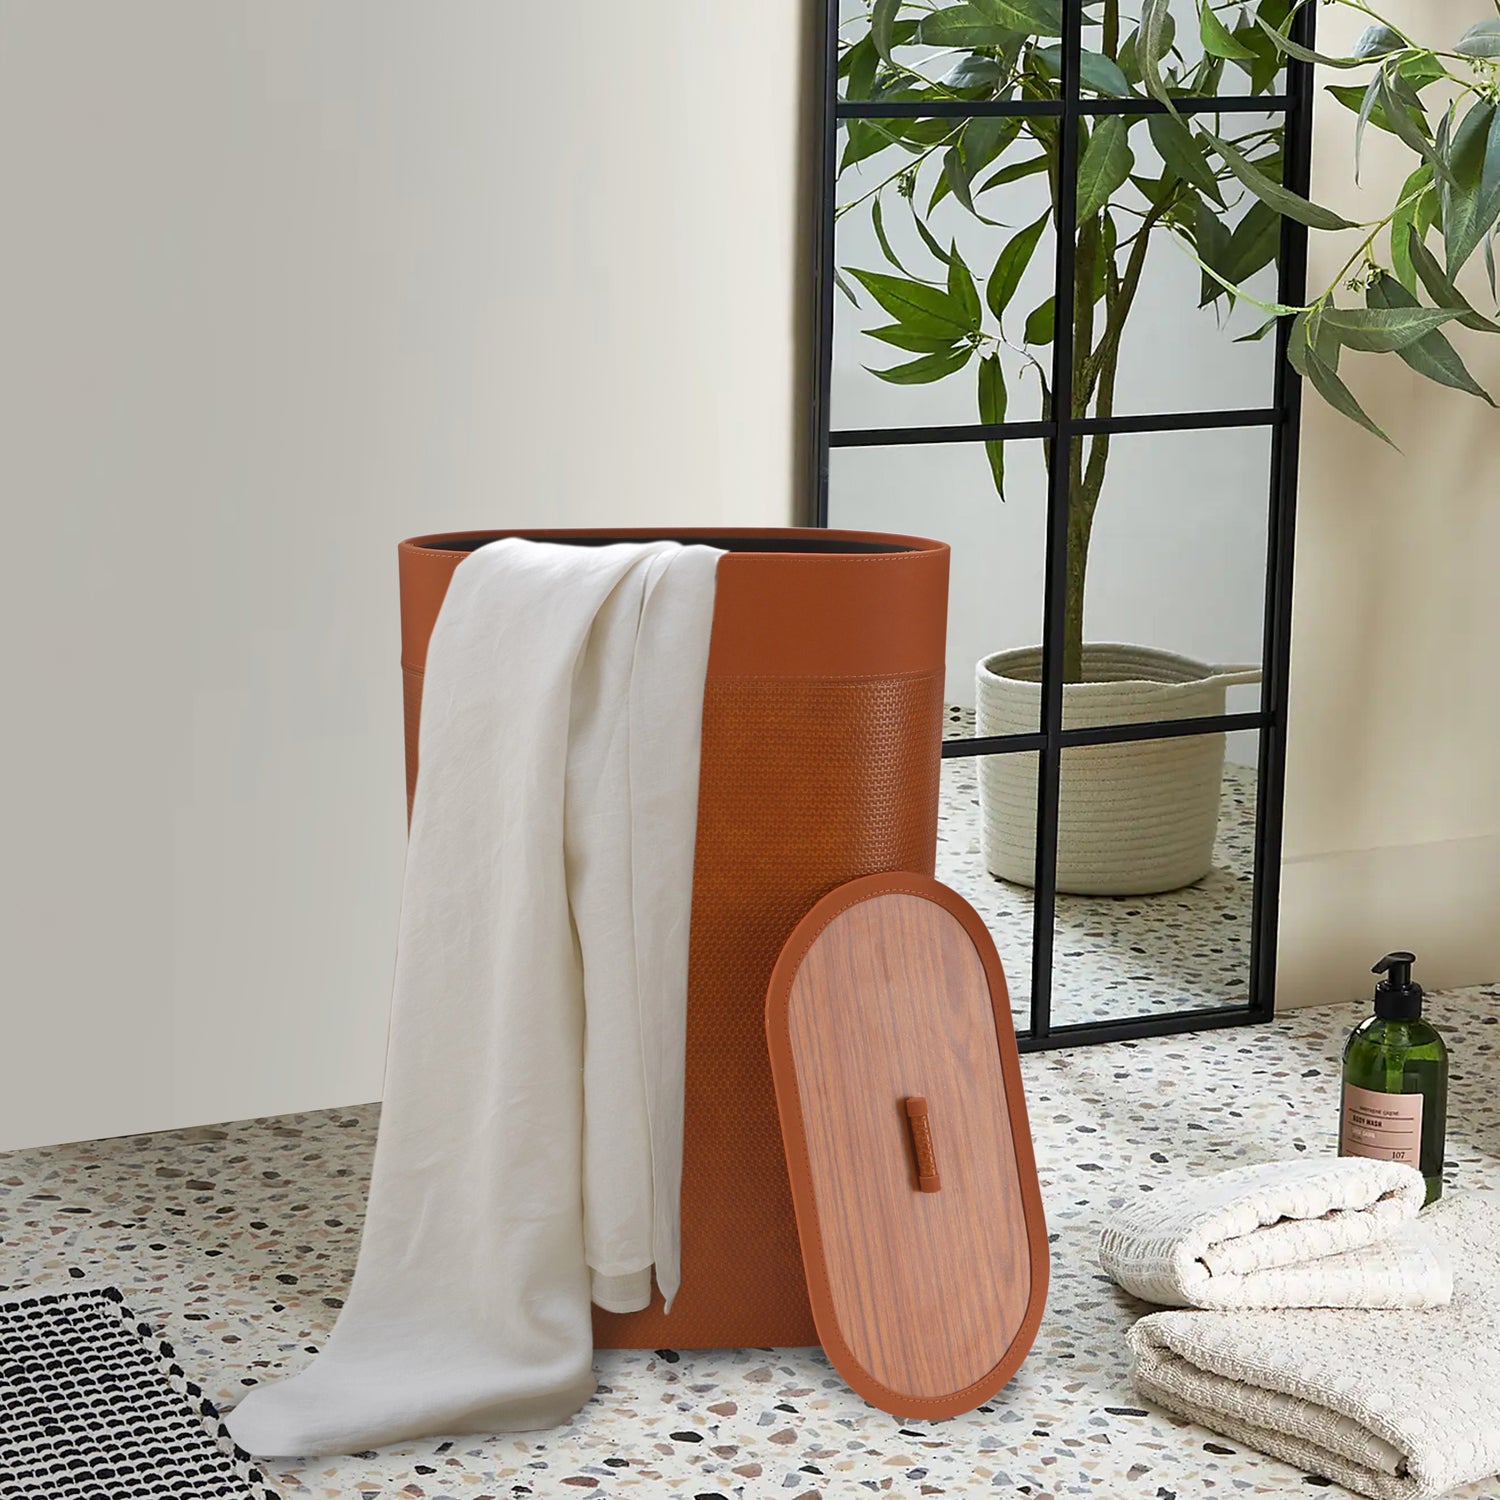 Laundry Bin - Tan Leatherette - The Home Co.